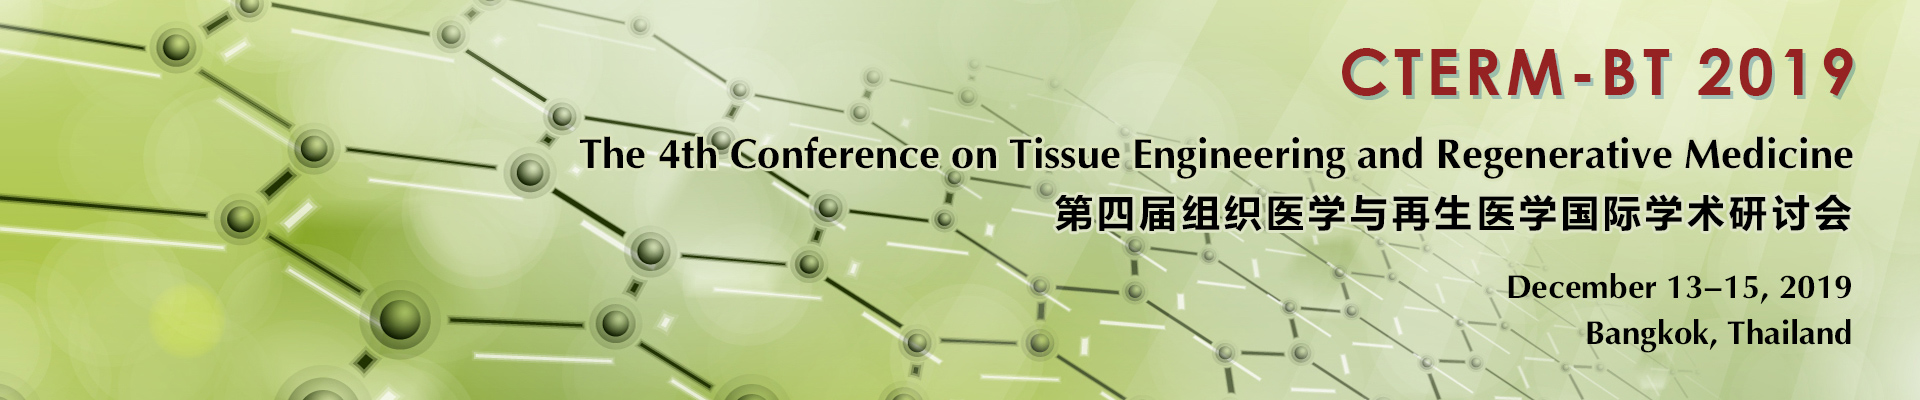 The 4th Conference on Tissue Engineering and Regenerative Medicine (CTERM-BT 2019), Bangkok, Thailand